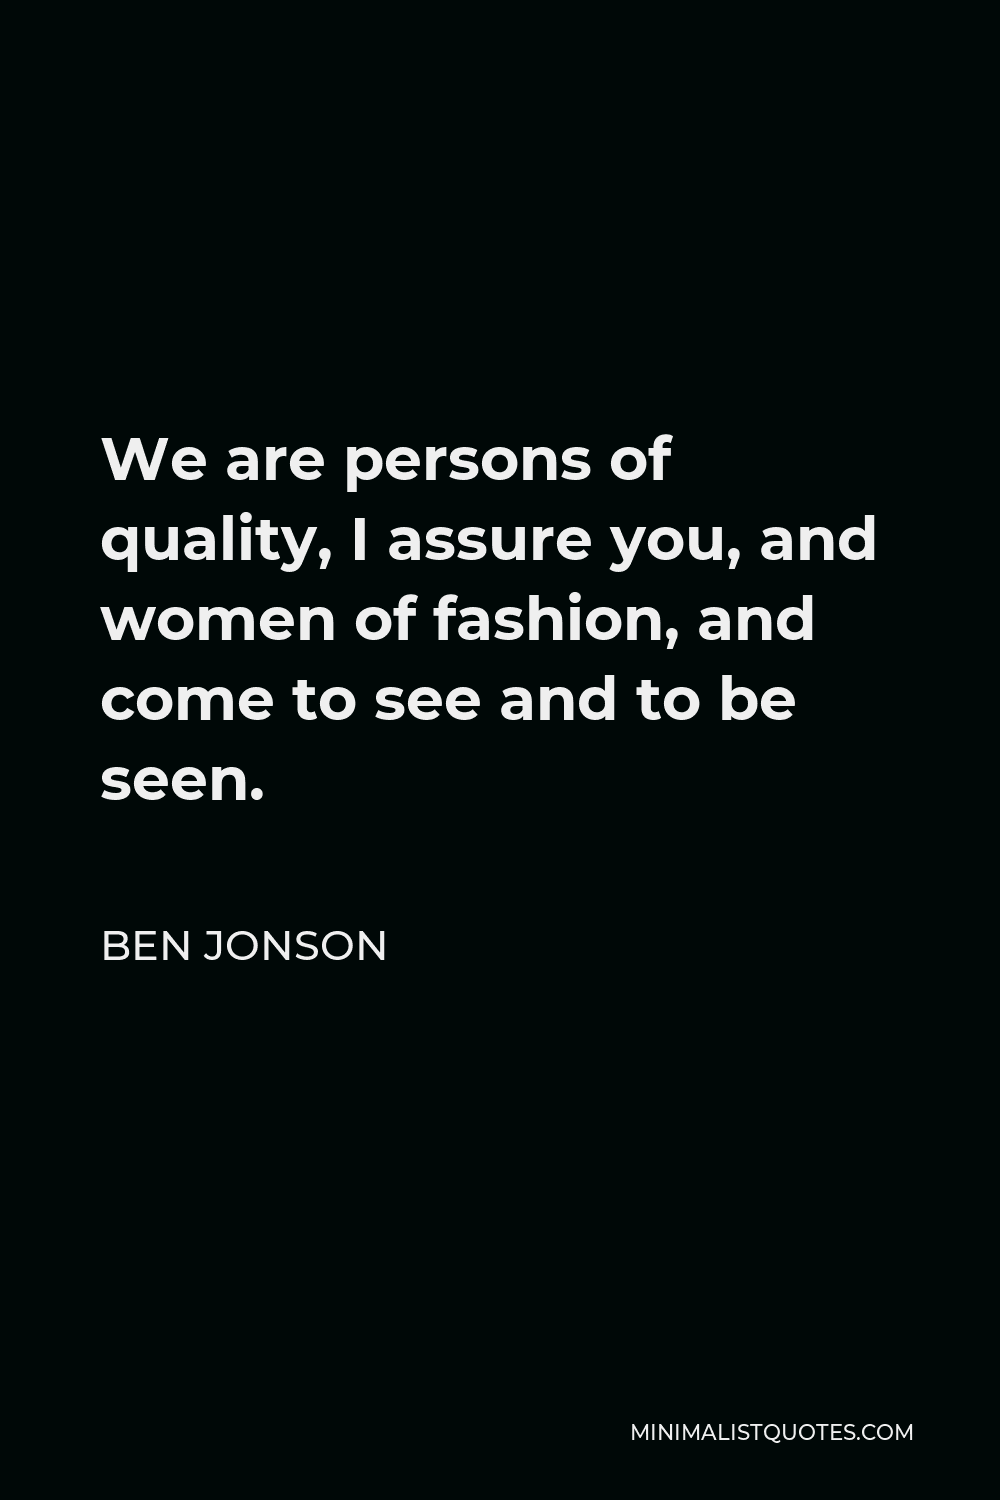 Ben Jonson Quote - We are persons of quality, I assure you, and women of fashion, and come to see and to be seen.